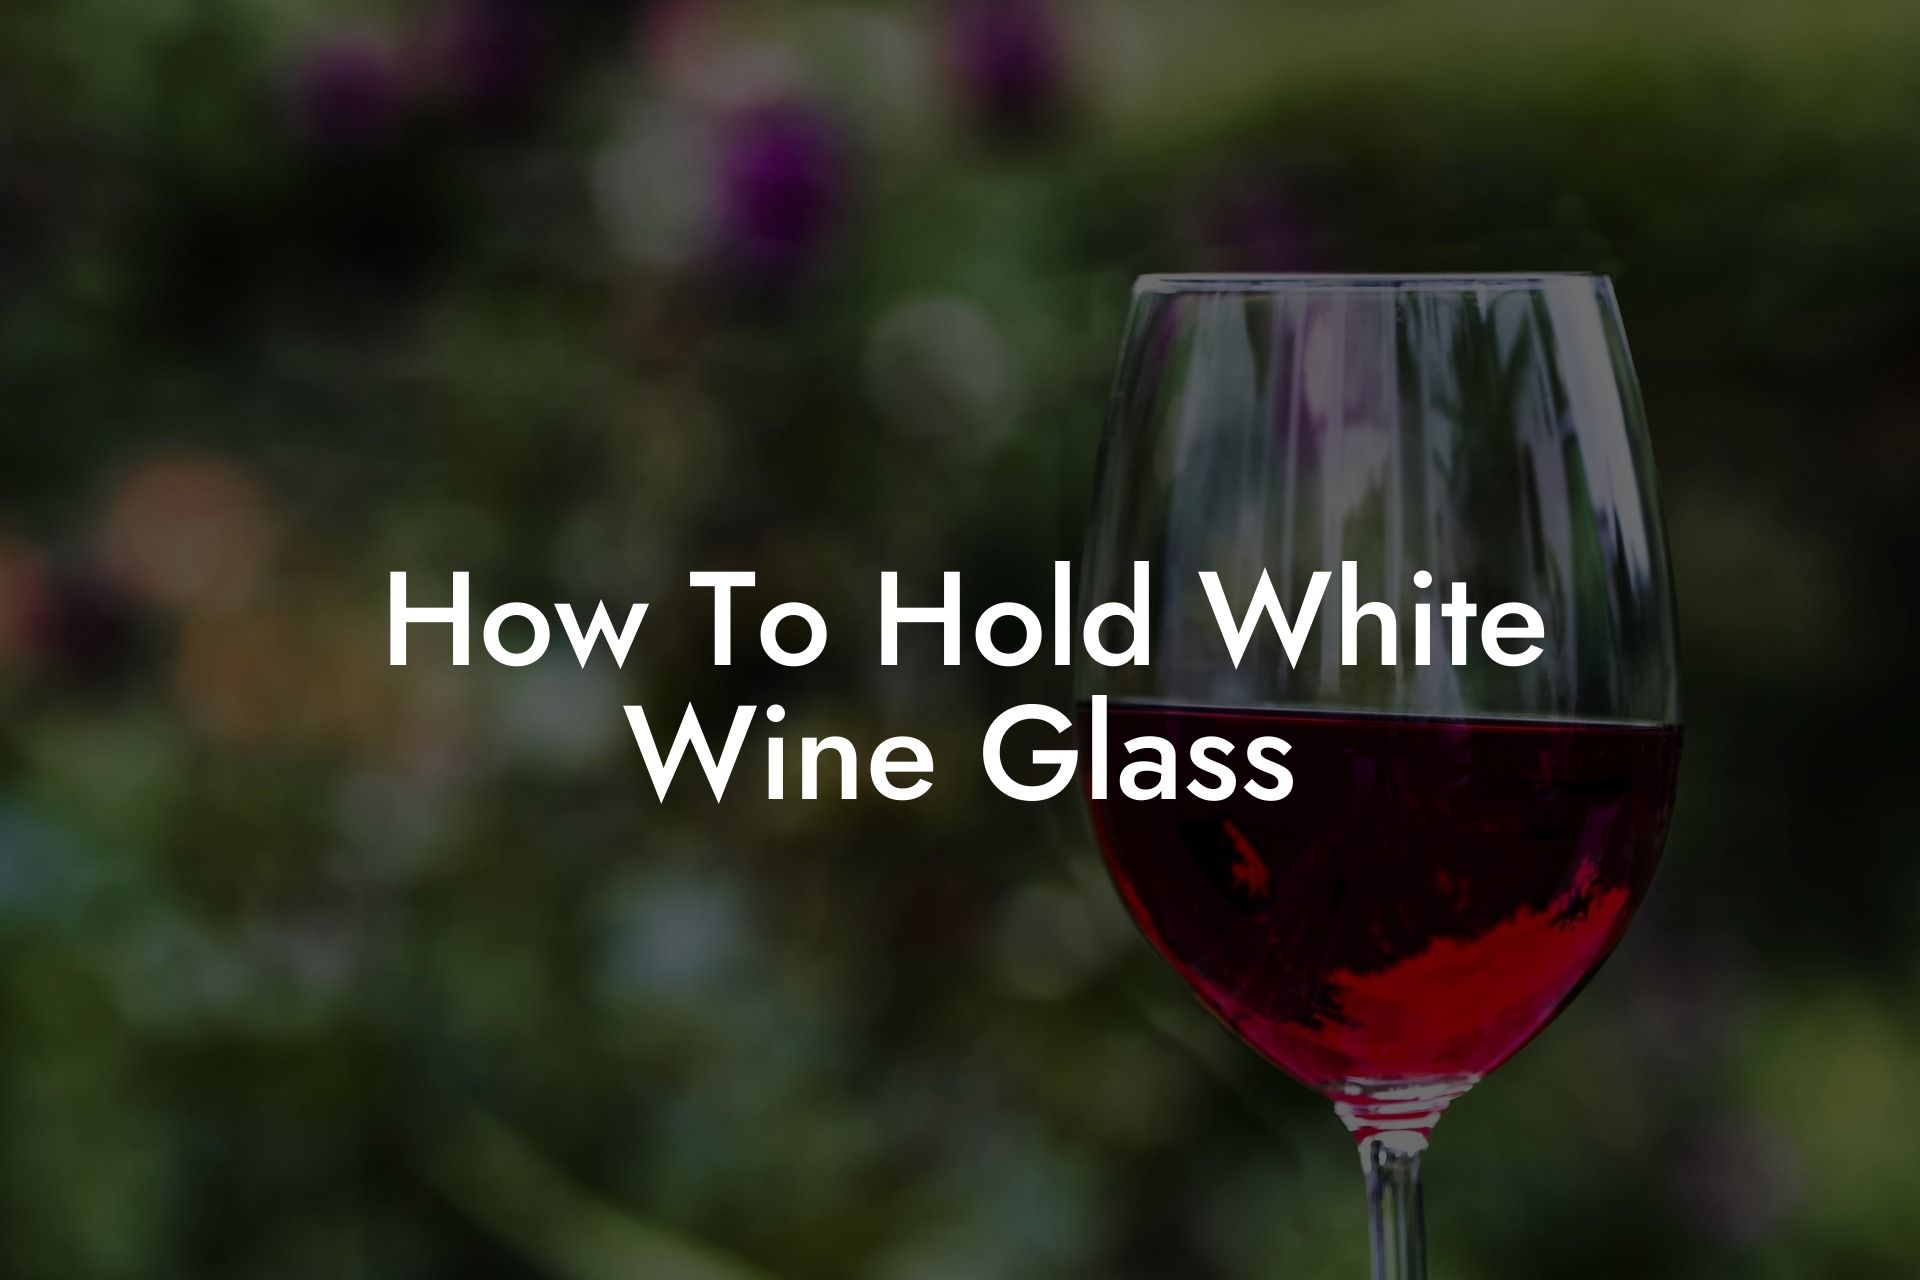 How To Hold White Wine Glass